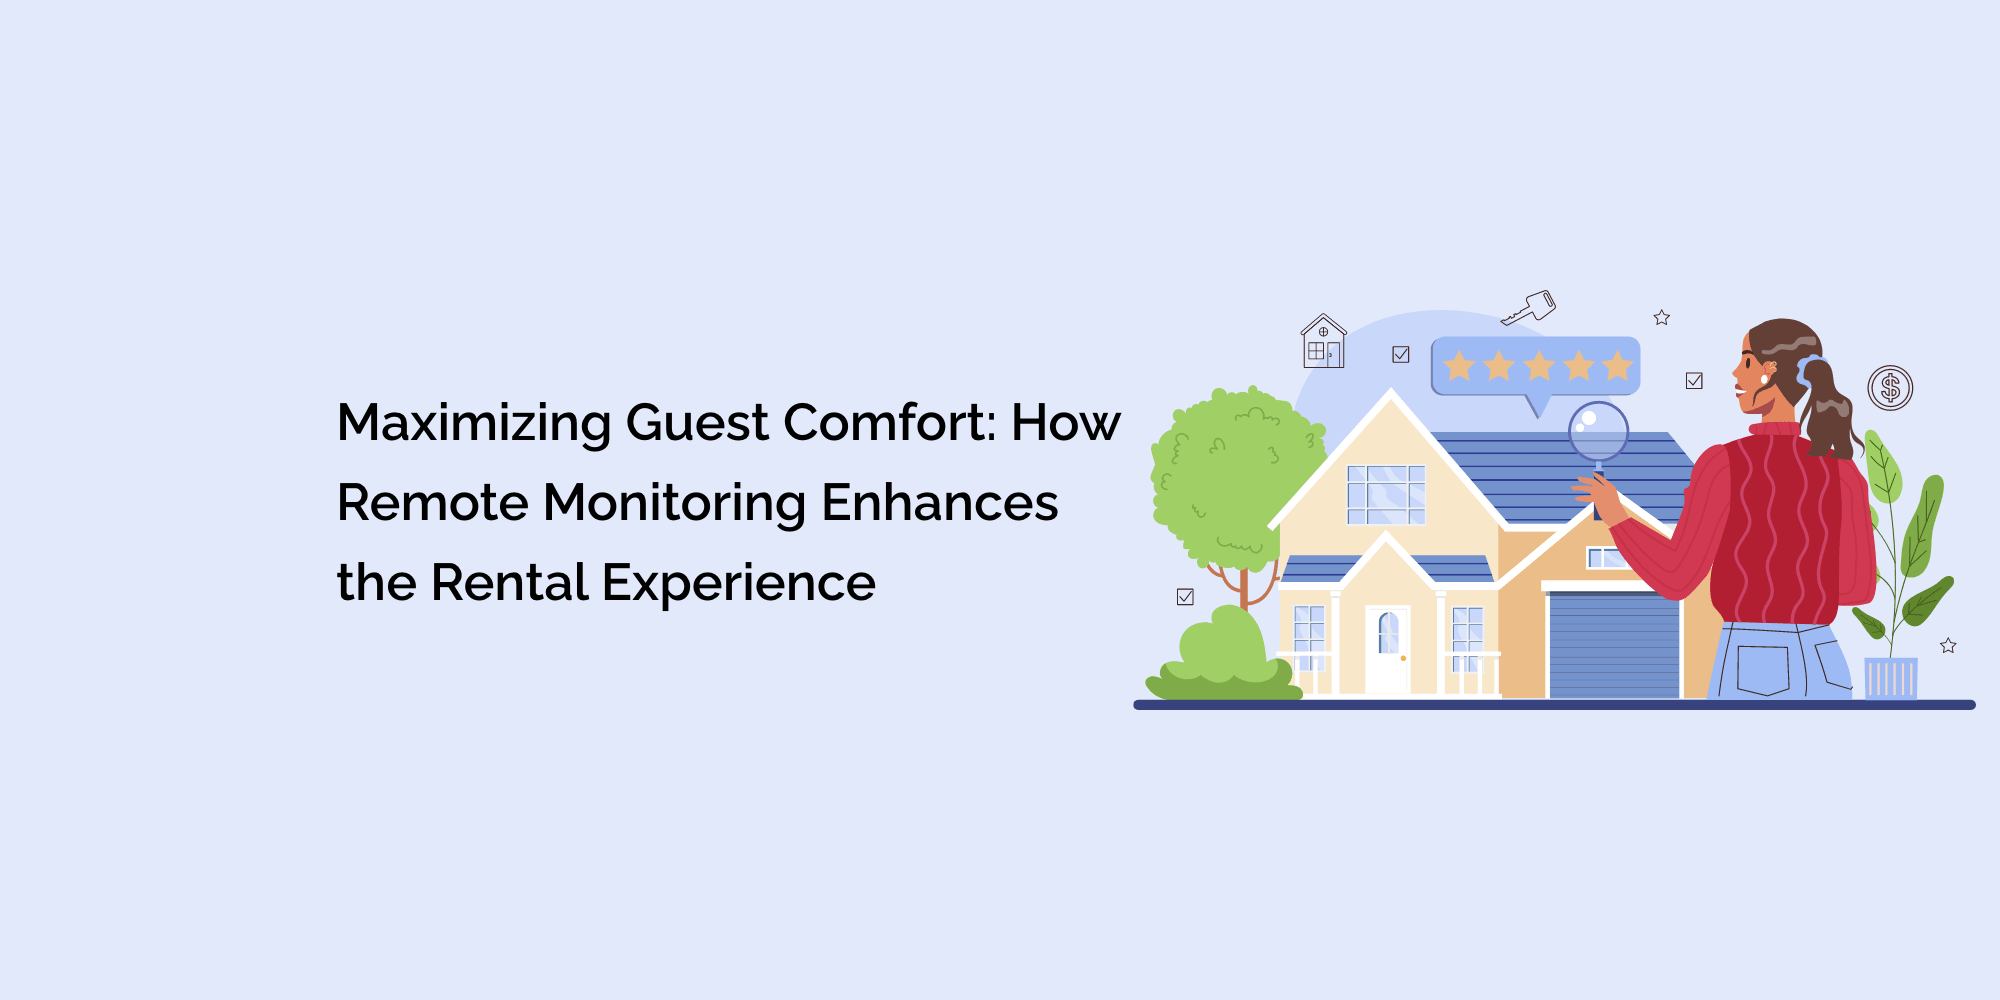 Maximizing Guest Comfort: How Remote Monitoring Enhances the Rental Experience